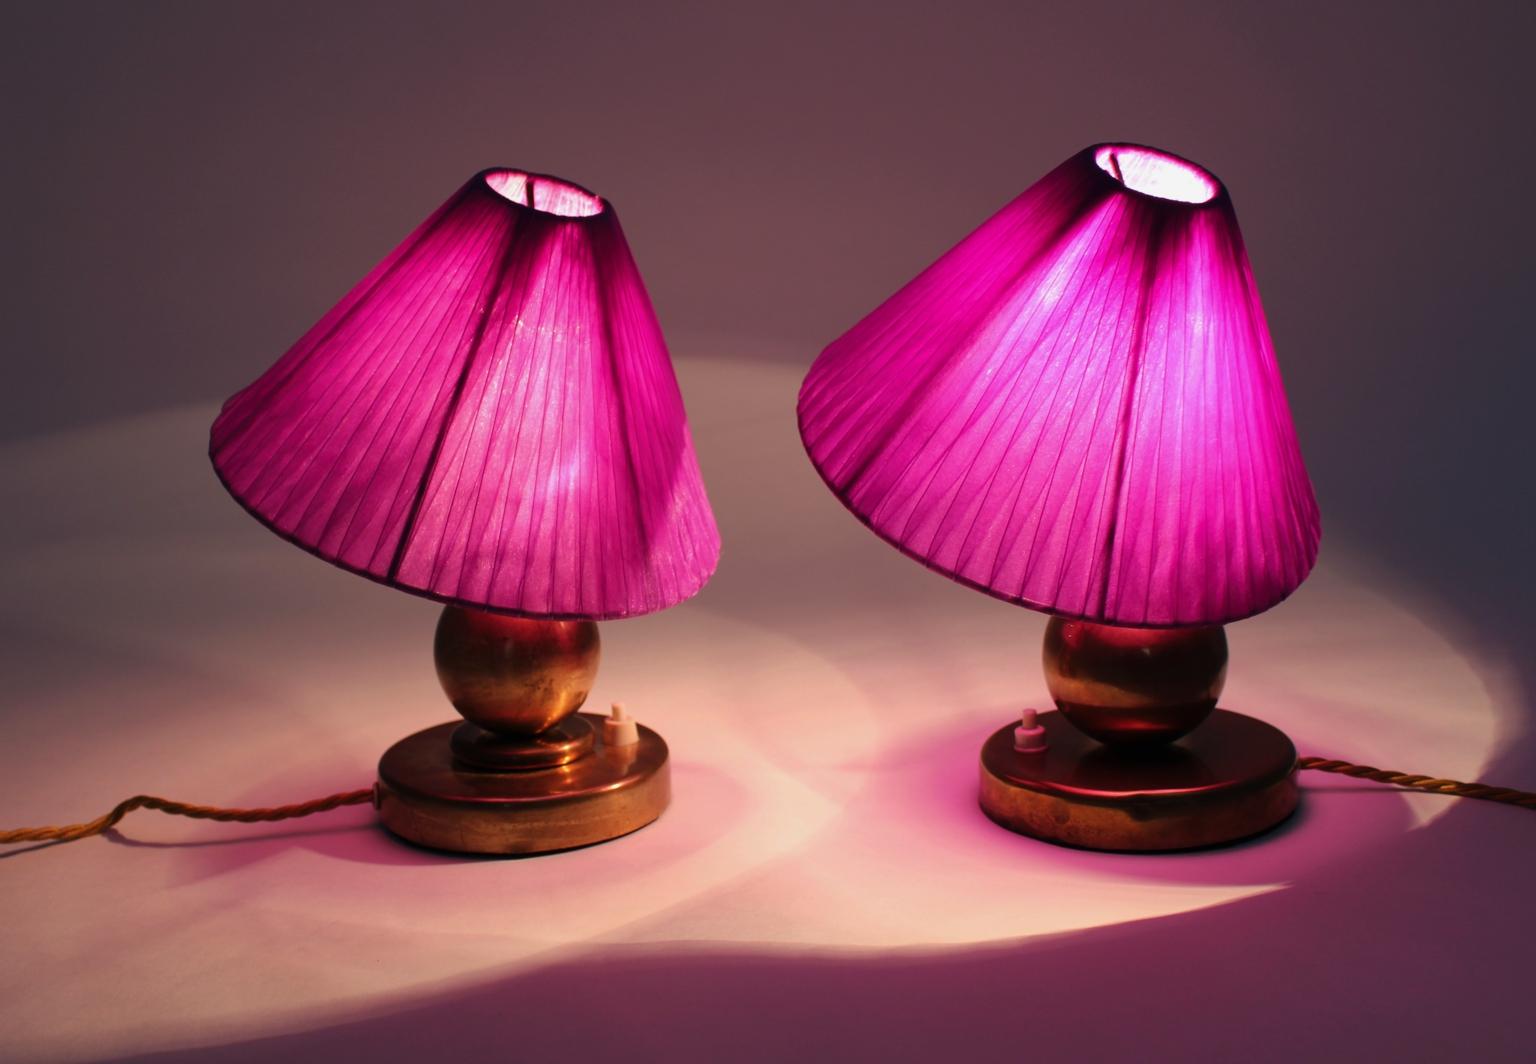 French Art Deco Brass Vintage Table Lamps with Lilac Lamp Shade 1930s, France